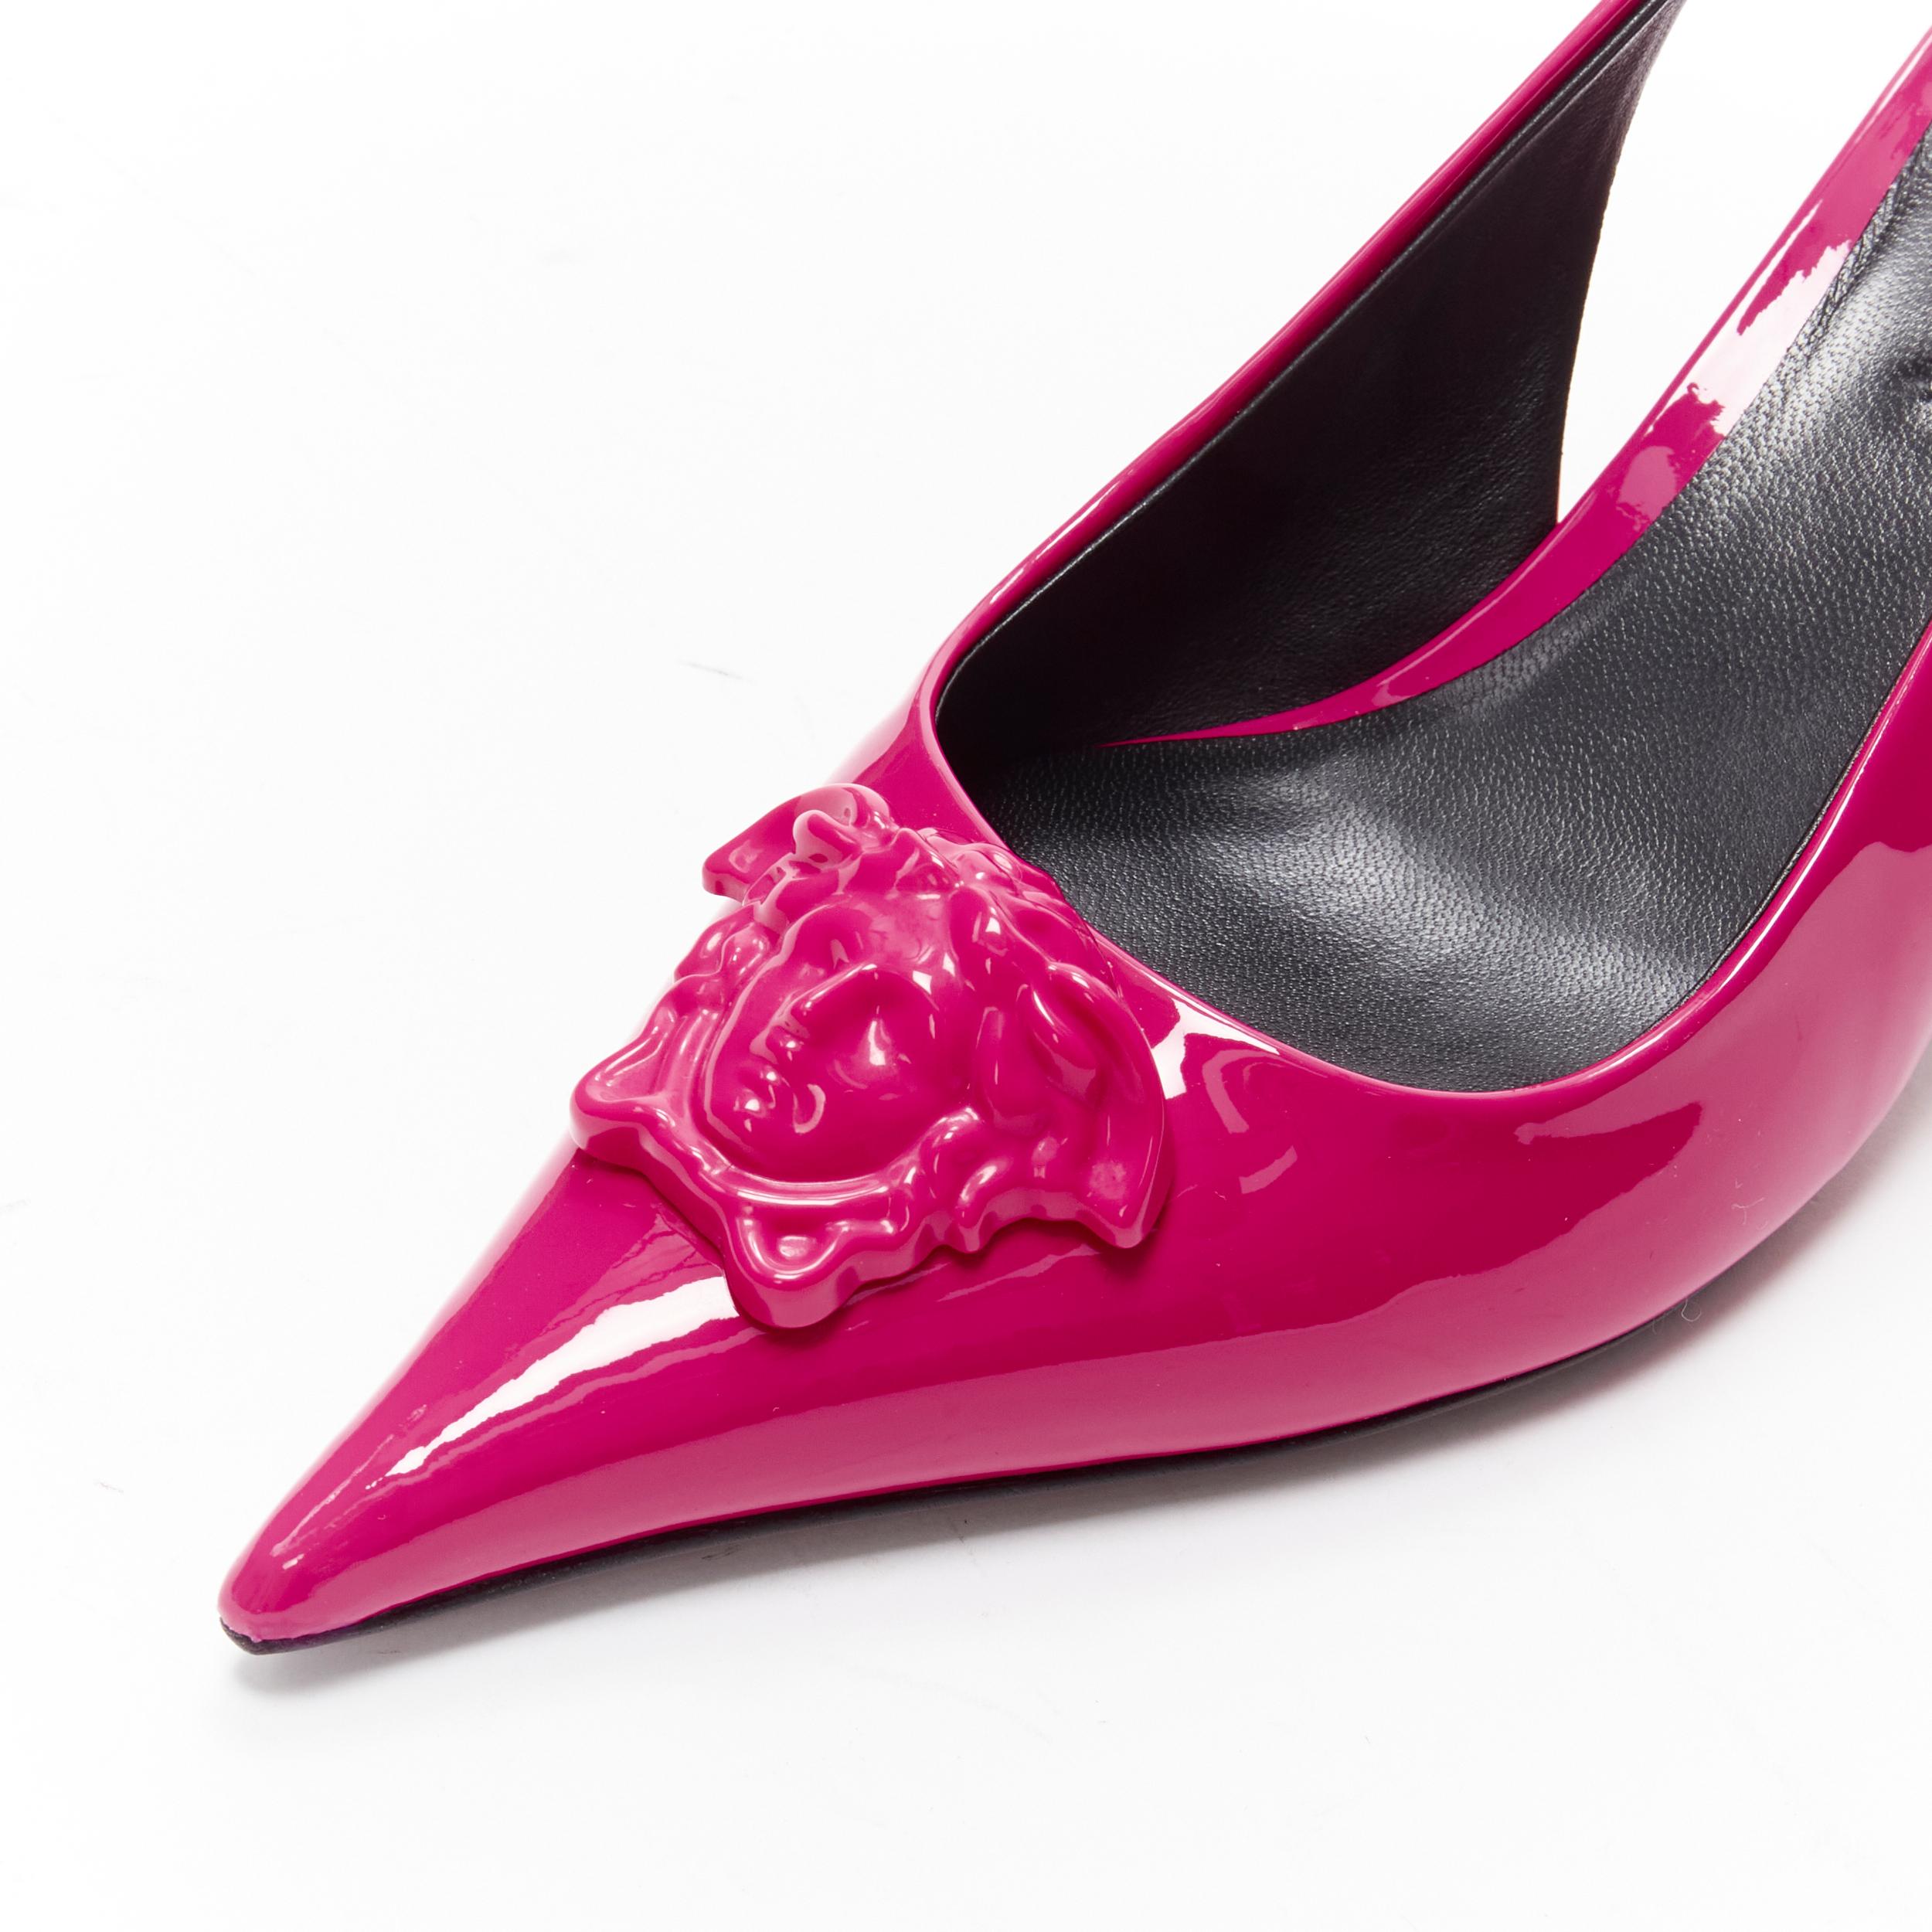 new VERSACE Palazzo Medusa fuscia pink sling kitteh heel pointed toe pump EU36

Reference: TGAS/C01776

Brand: Versace

Designer: Donatella Versace

Model: DST638H D2VE 1P660

Material: Leather

Color: Black

Pattern: Solid

Estimated Retail Price: